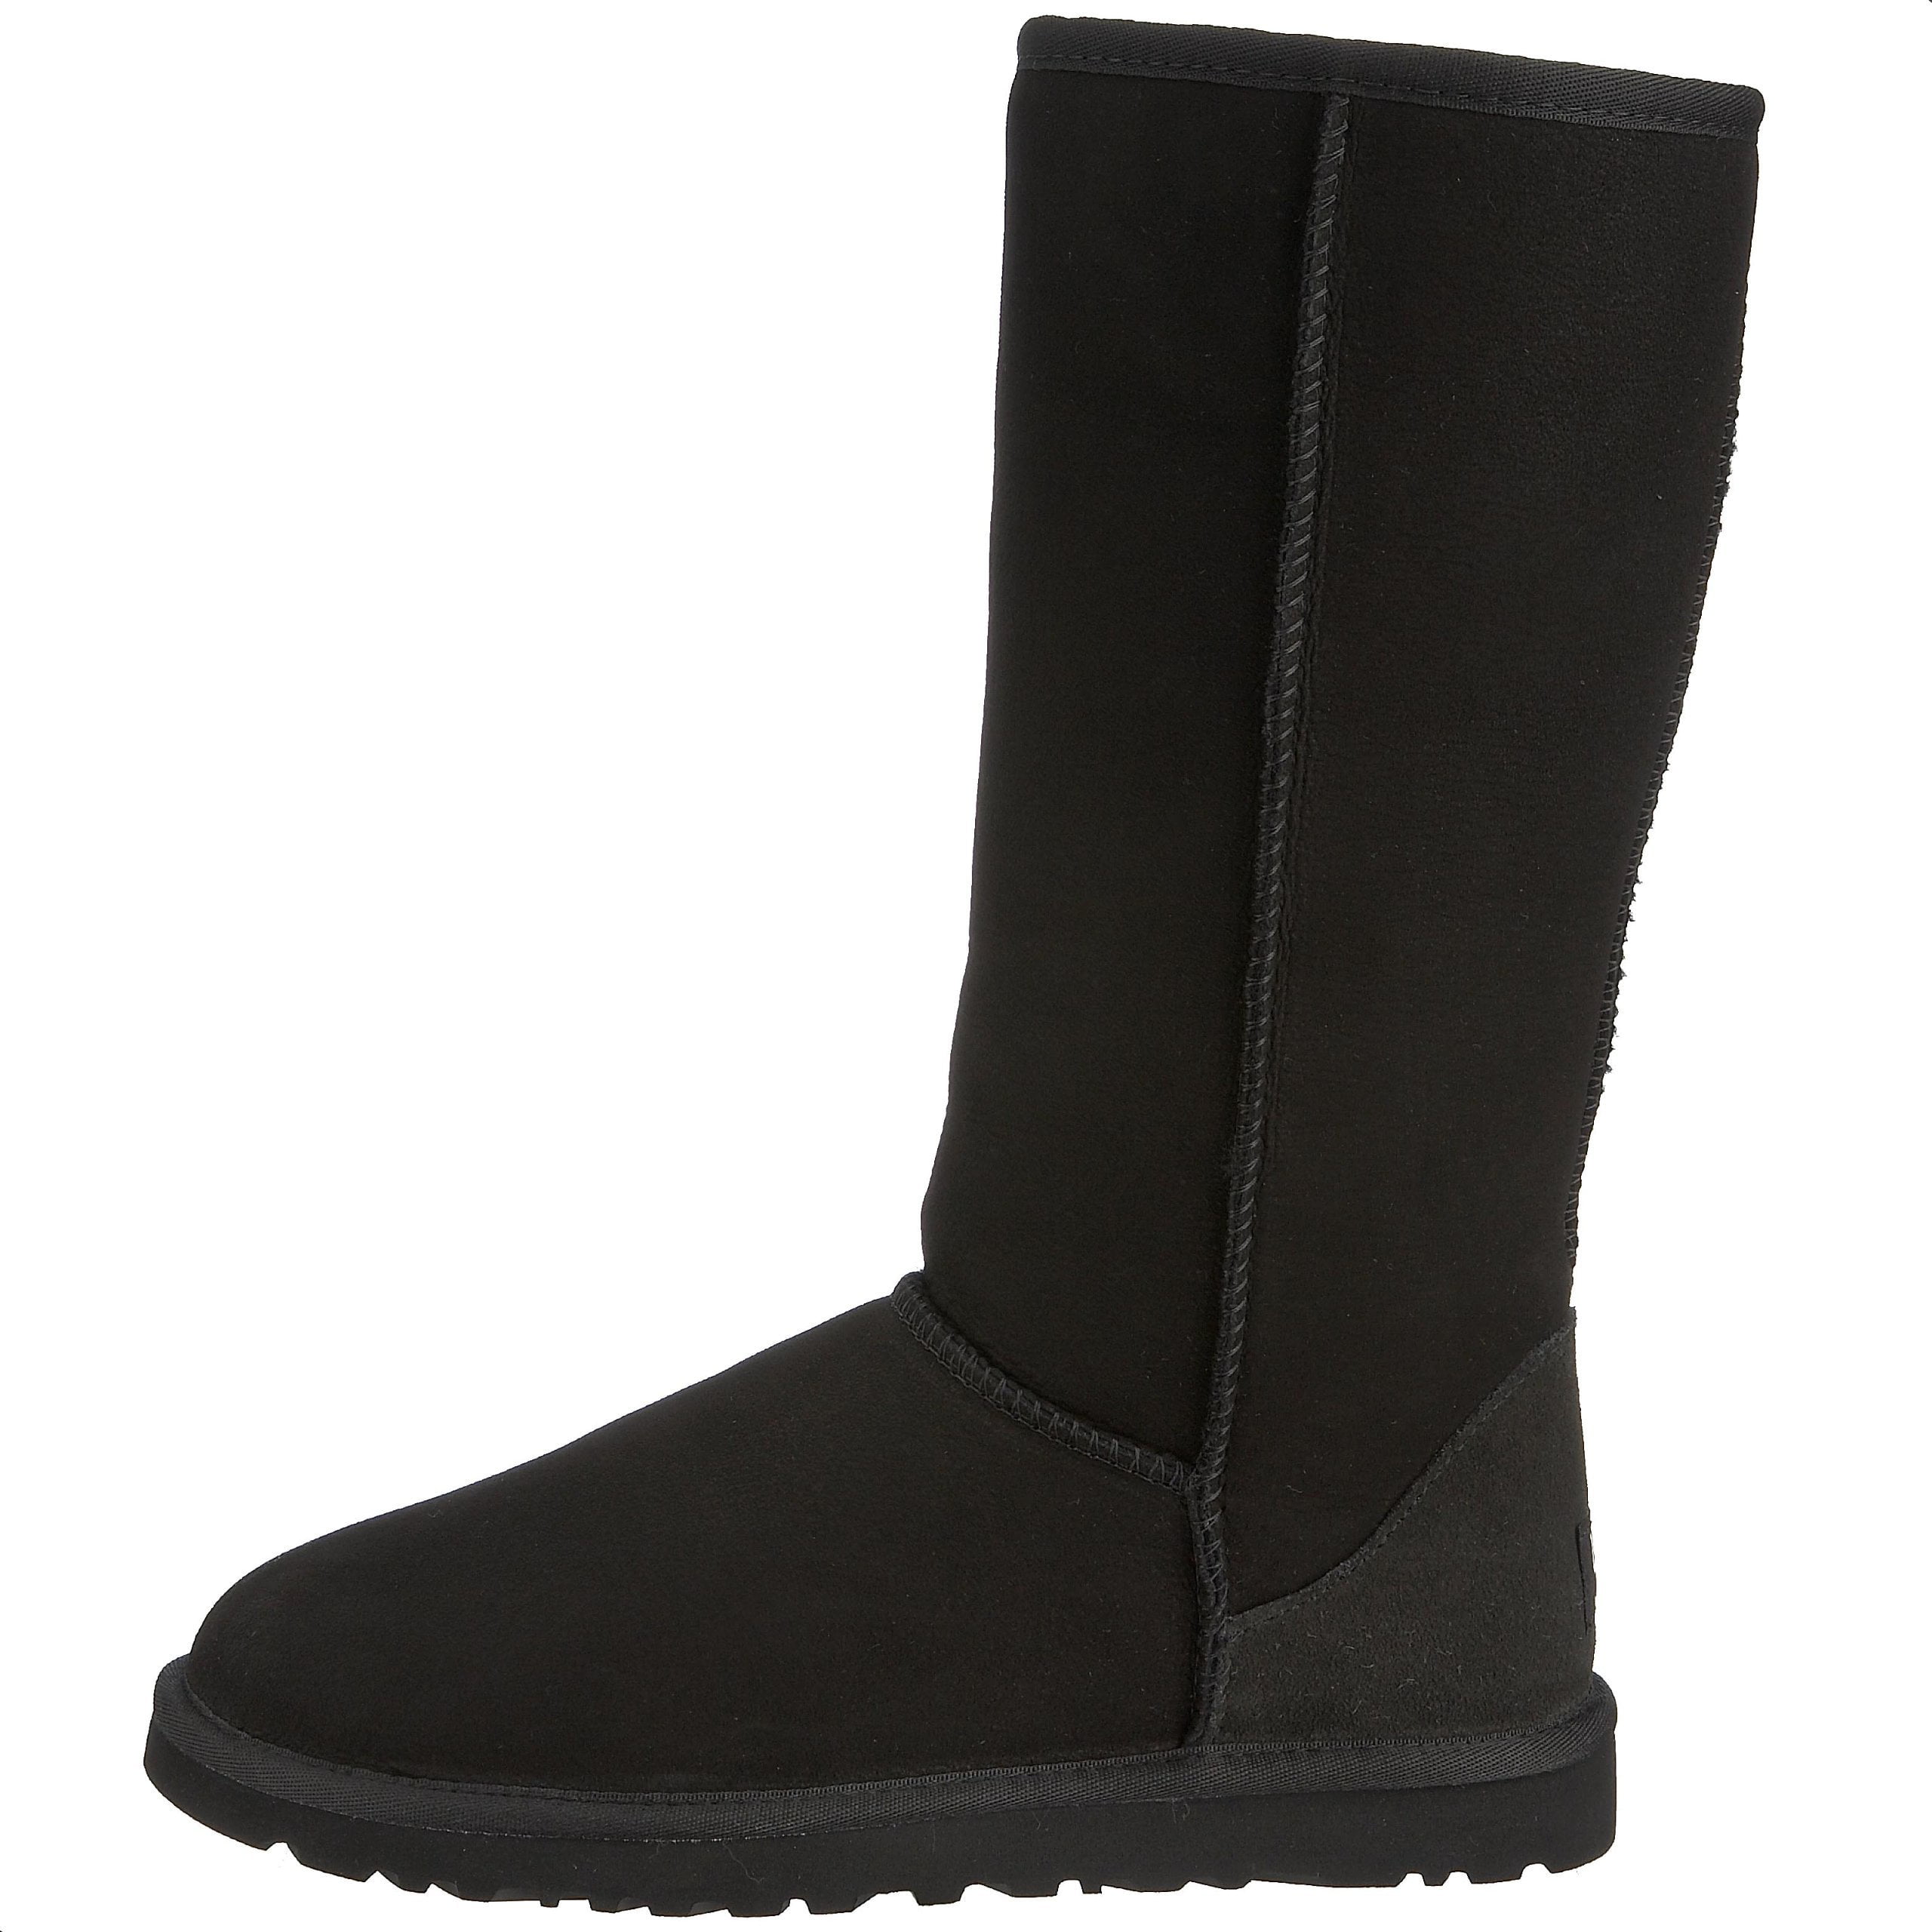 tall grey ugg boots sale